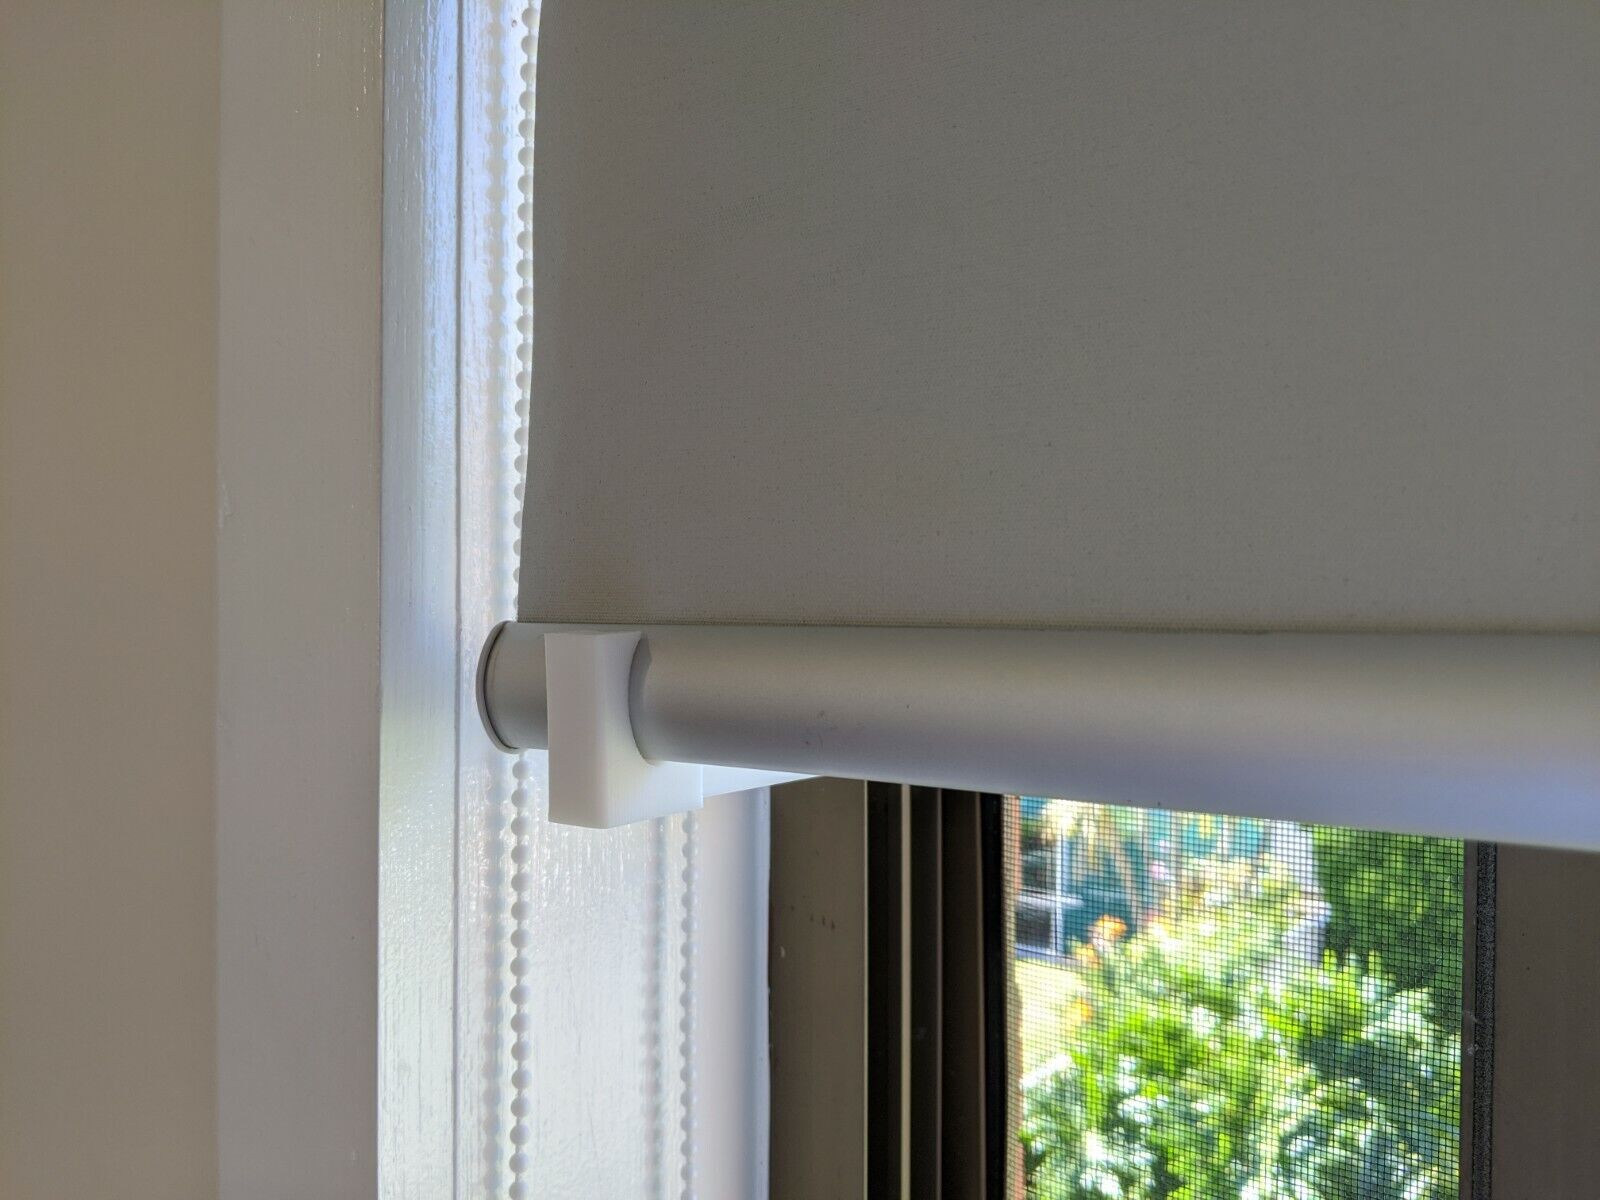 How To Prevent Window Blinds From Banging